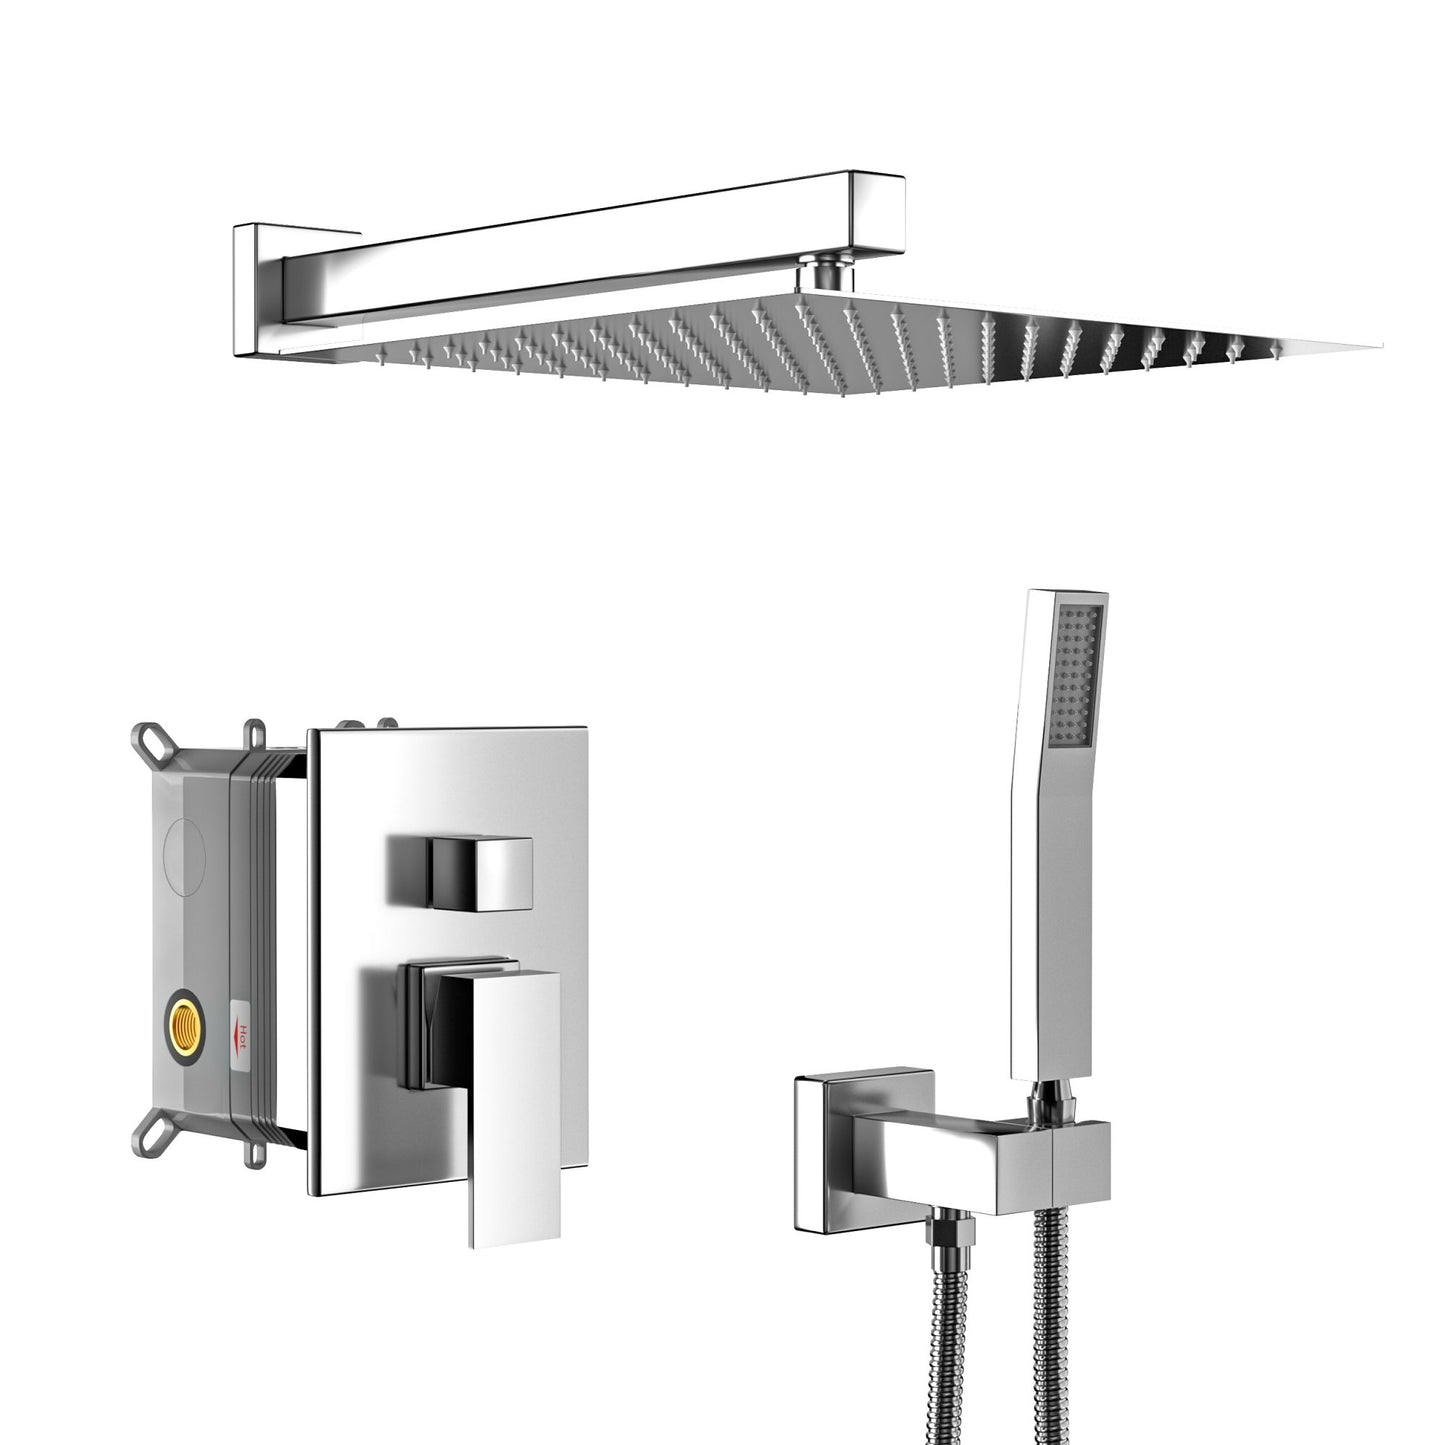 Dual Shower Head - 12 Inch Wall Mounted Square Shower System with Rough-in Valve,Chrome